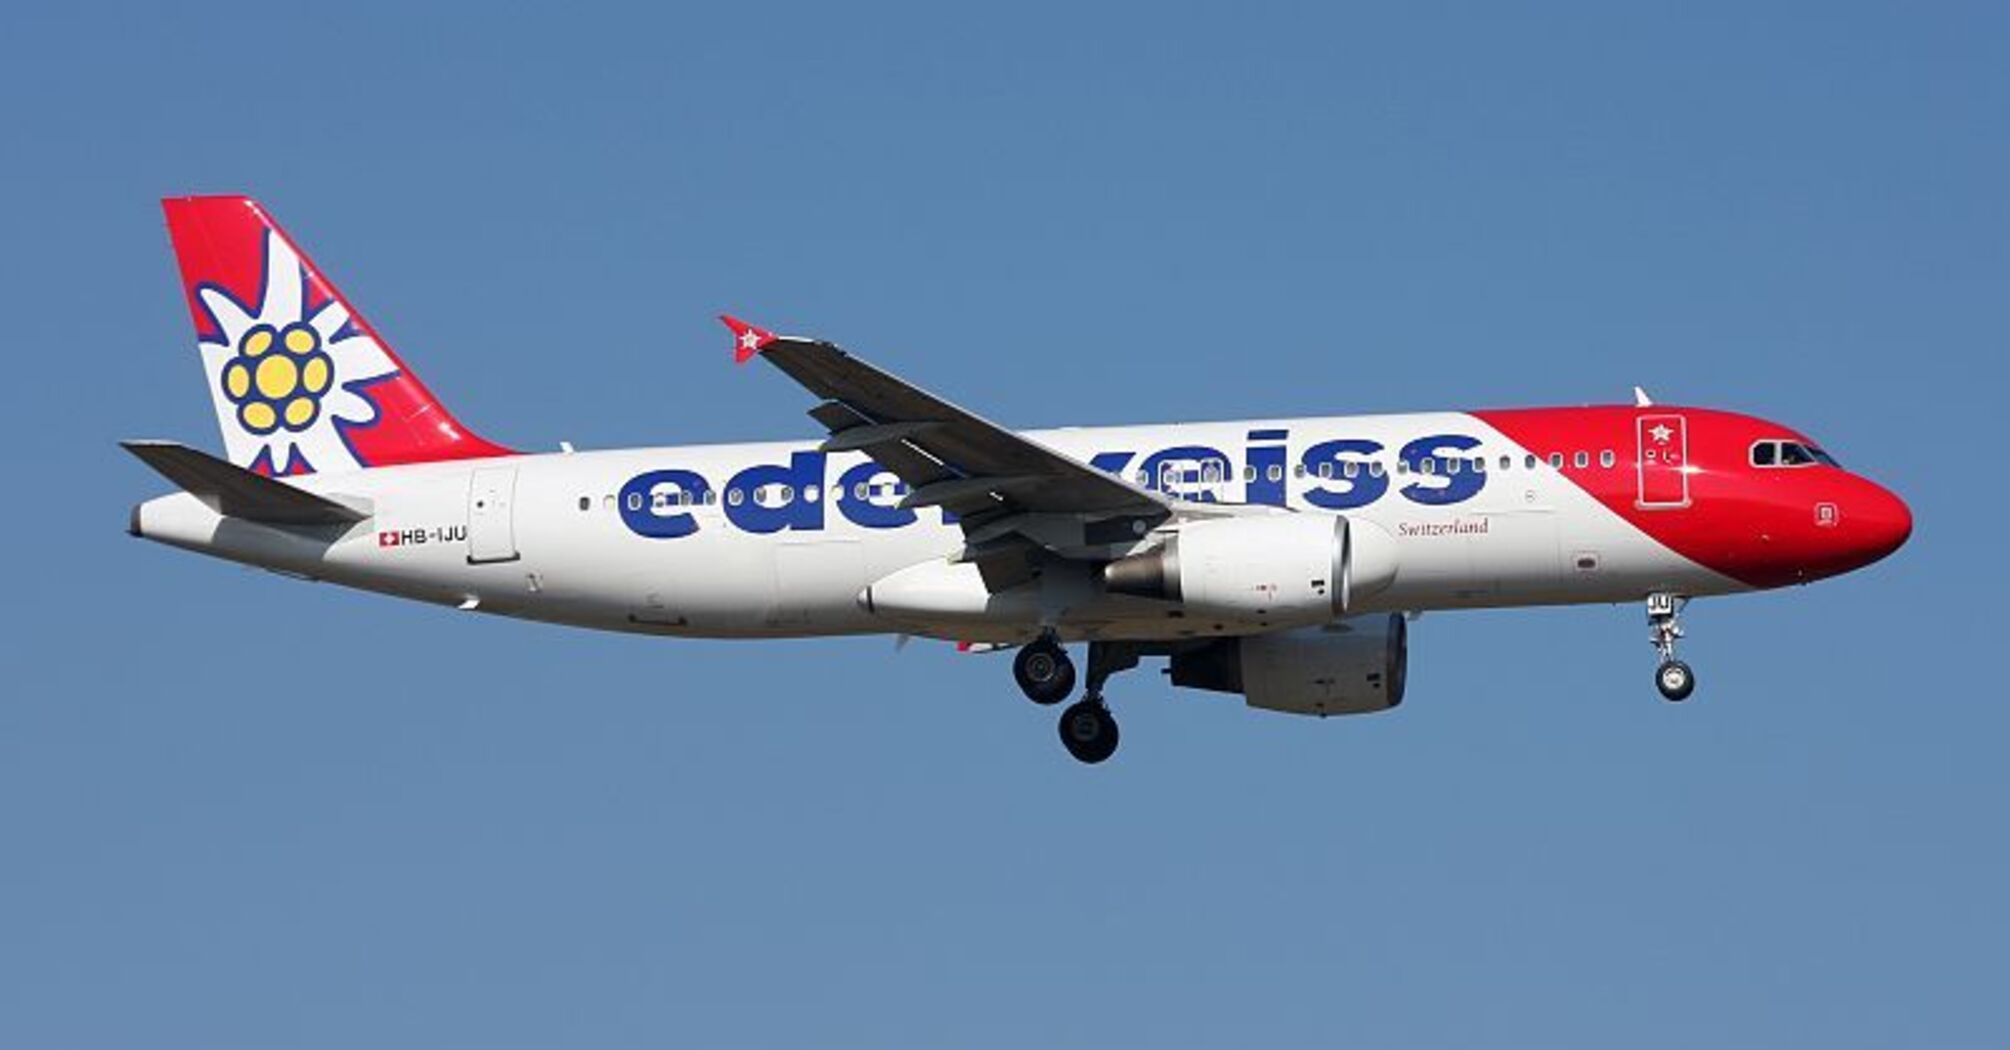 Edelweiss Air Compensation for Delayed or Cancelled Flights